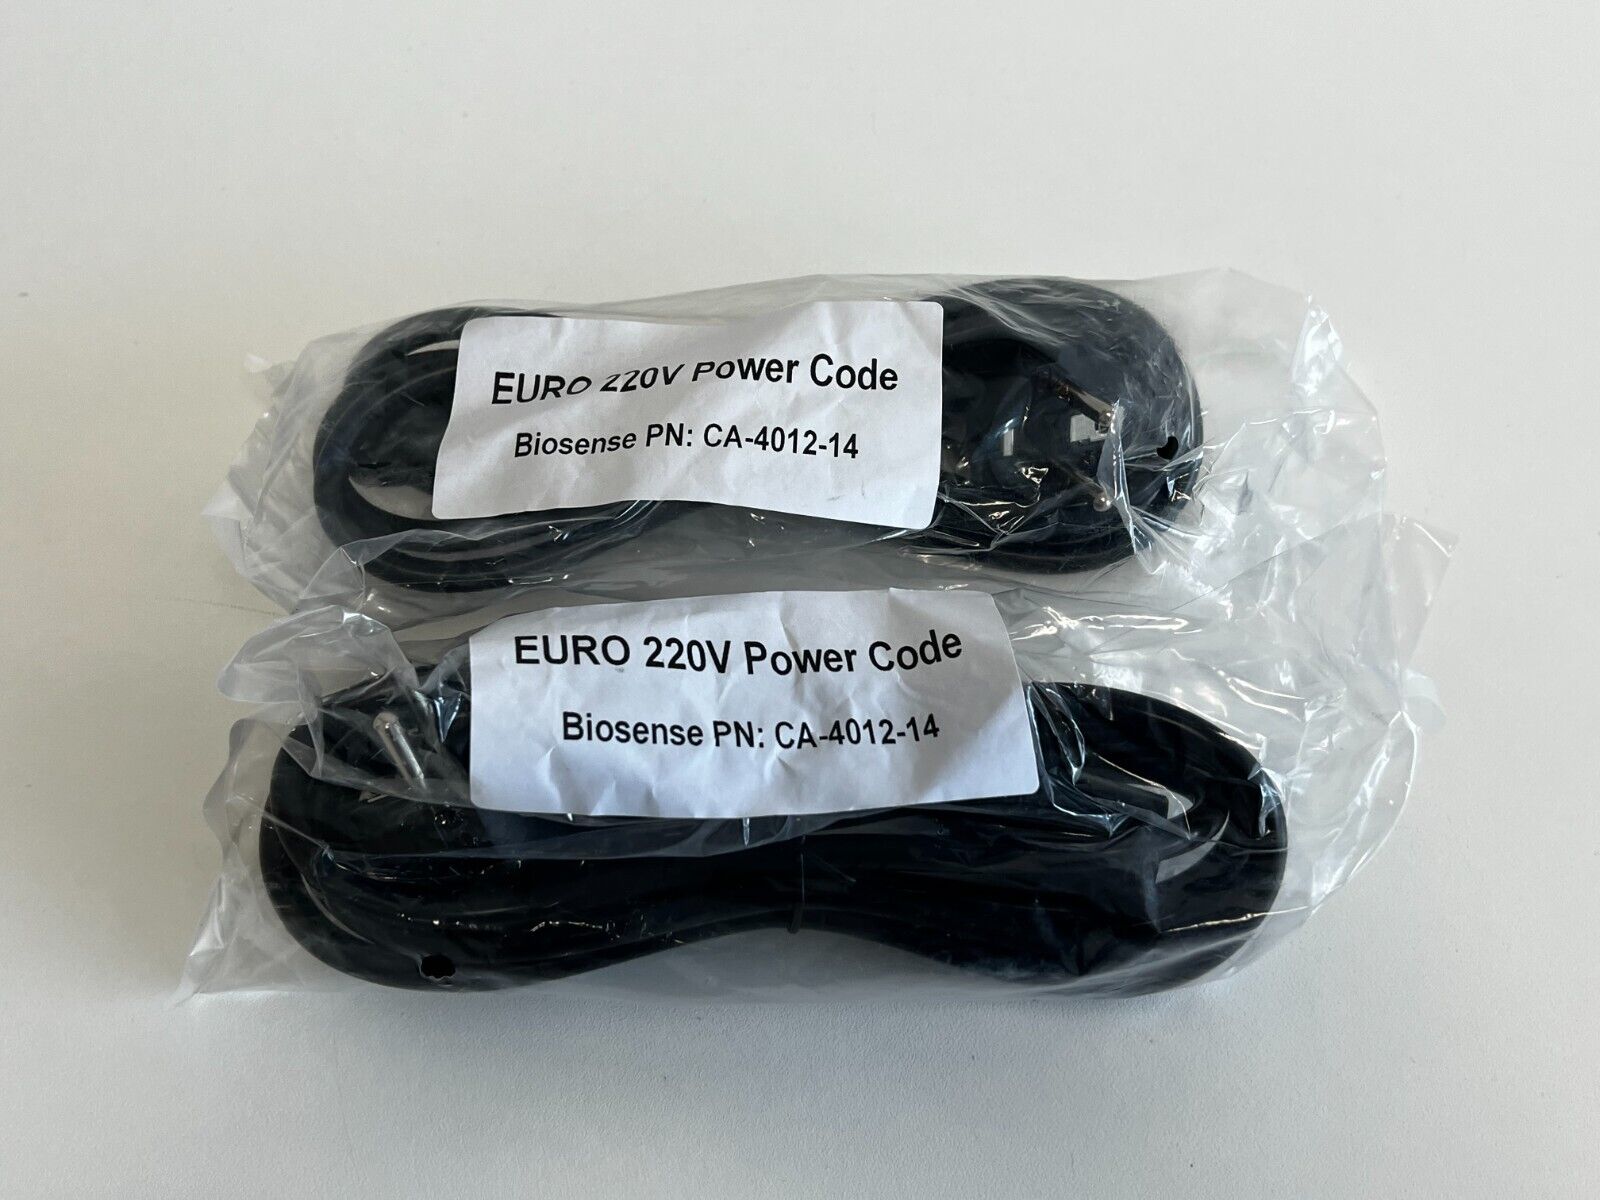 LL15:  Lot of 2 Biosesne CA-4012-14 Euro 220v Power Cables